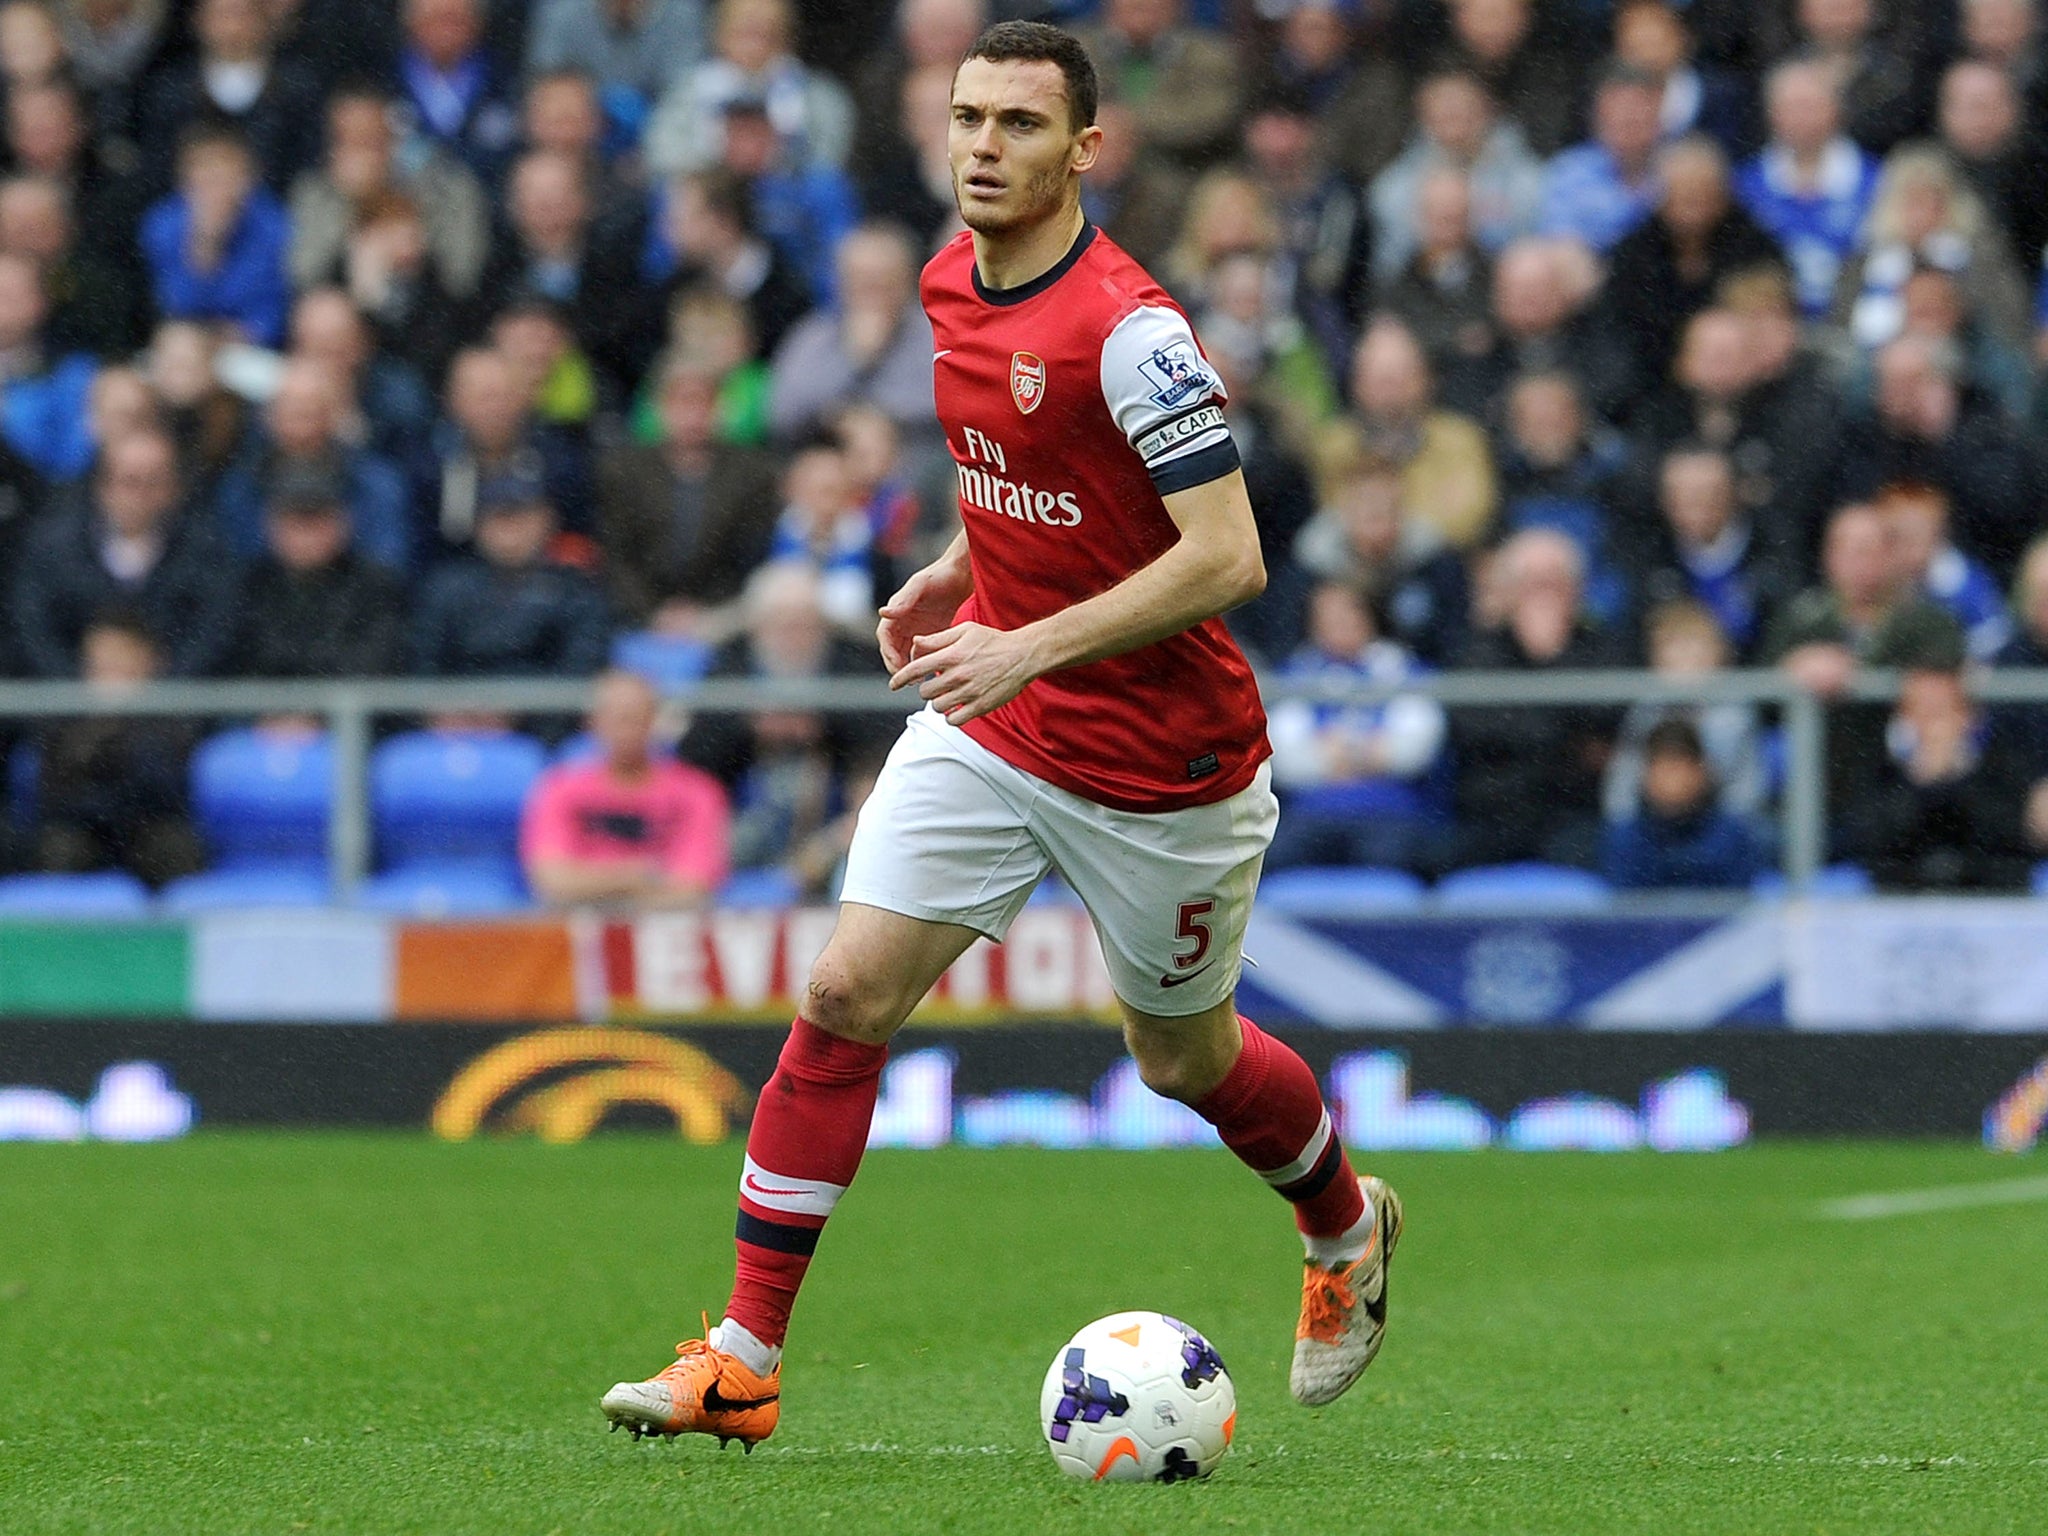 Thomas Vermaelen has verbally agreed a move to Manchester United, according to reports